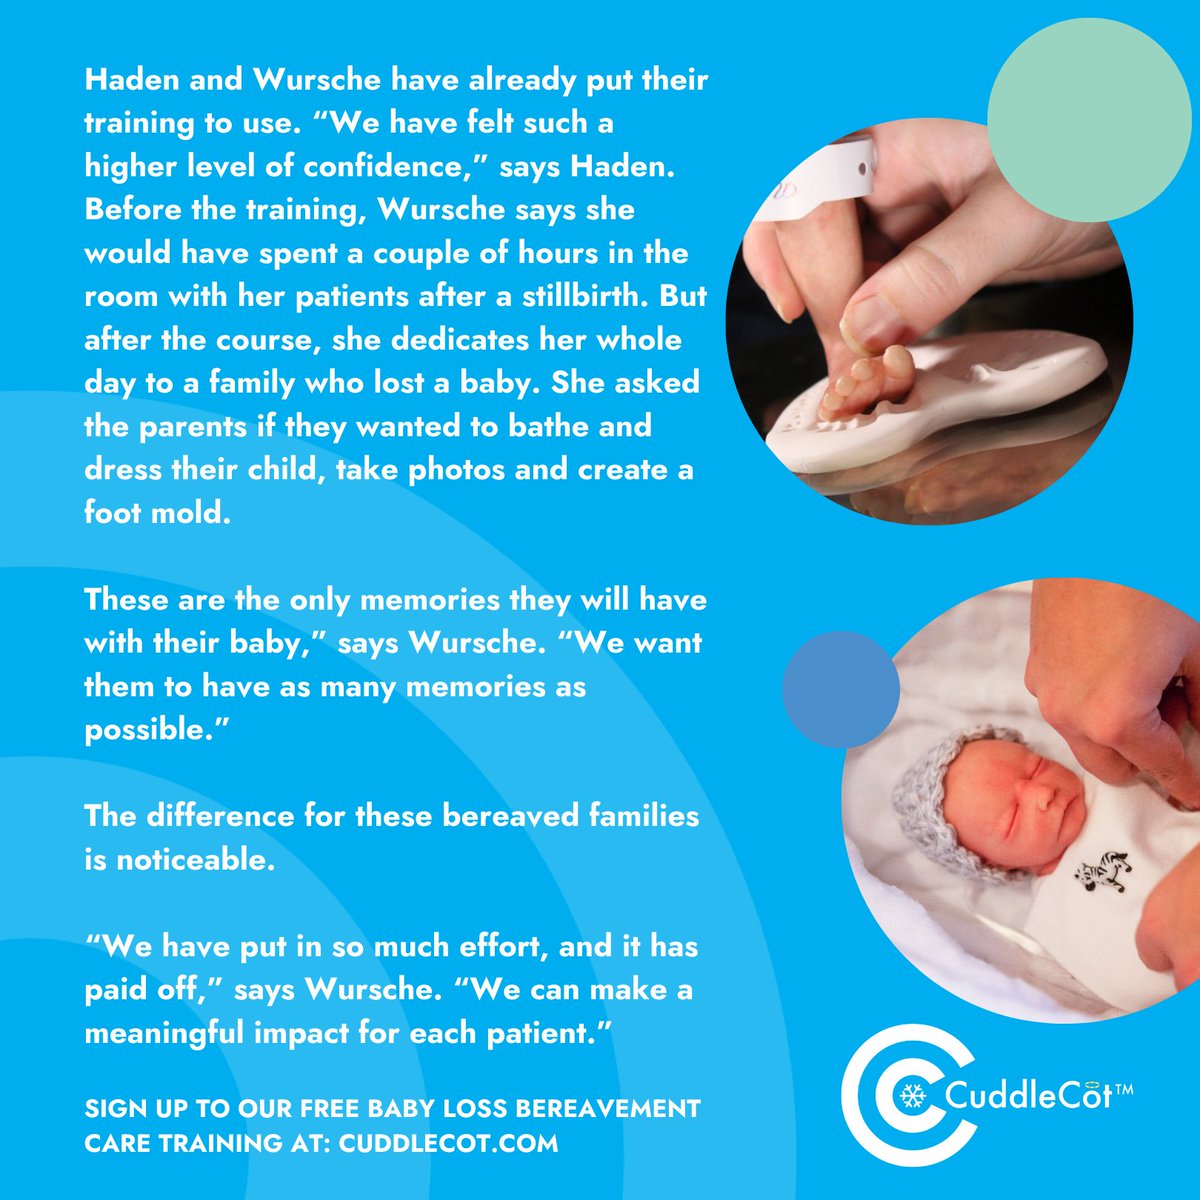 Empathy and understanding are vital when supporting families through the pain of baby loss. 🕊 Let's ensure every clinician has the tools they need to offer the support and comfort that grieving families deserve. Visit cuddlecot.com/training #BabyLossAwareness #BereavementCare